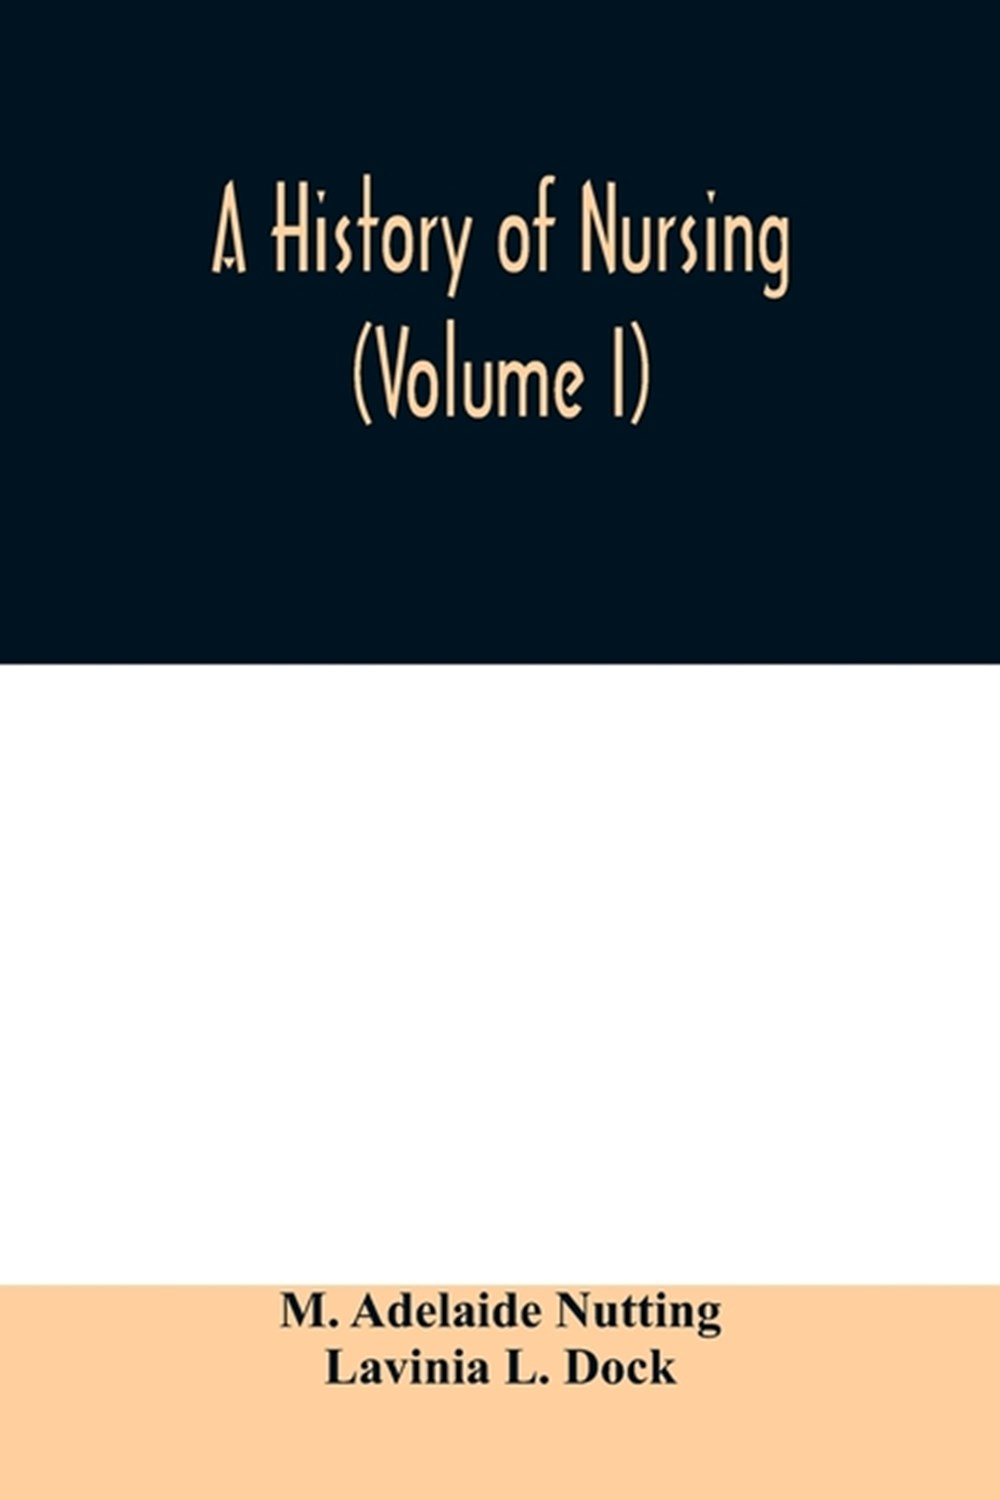 history of nursing; the evolution of nursing systems from the earliest times to the foundation of th